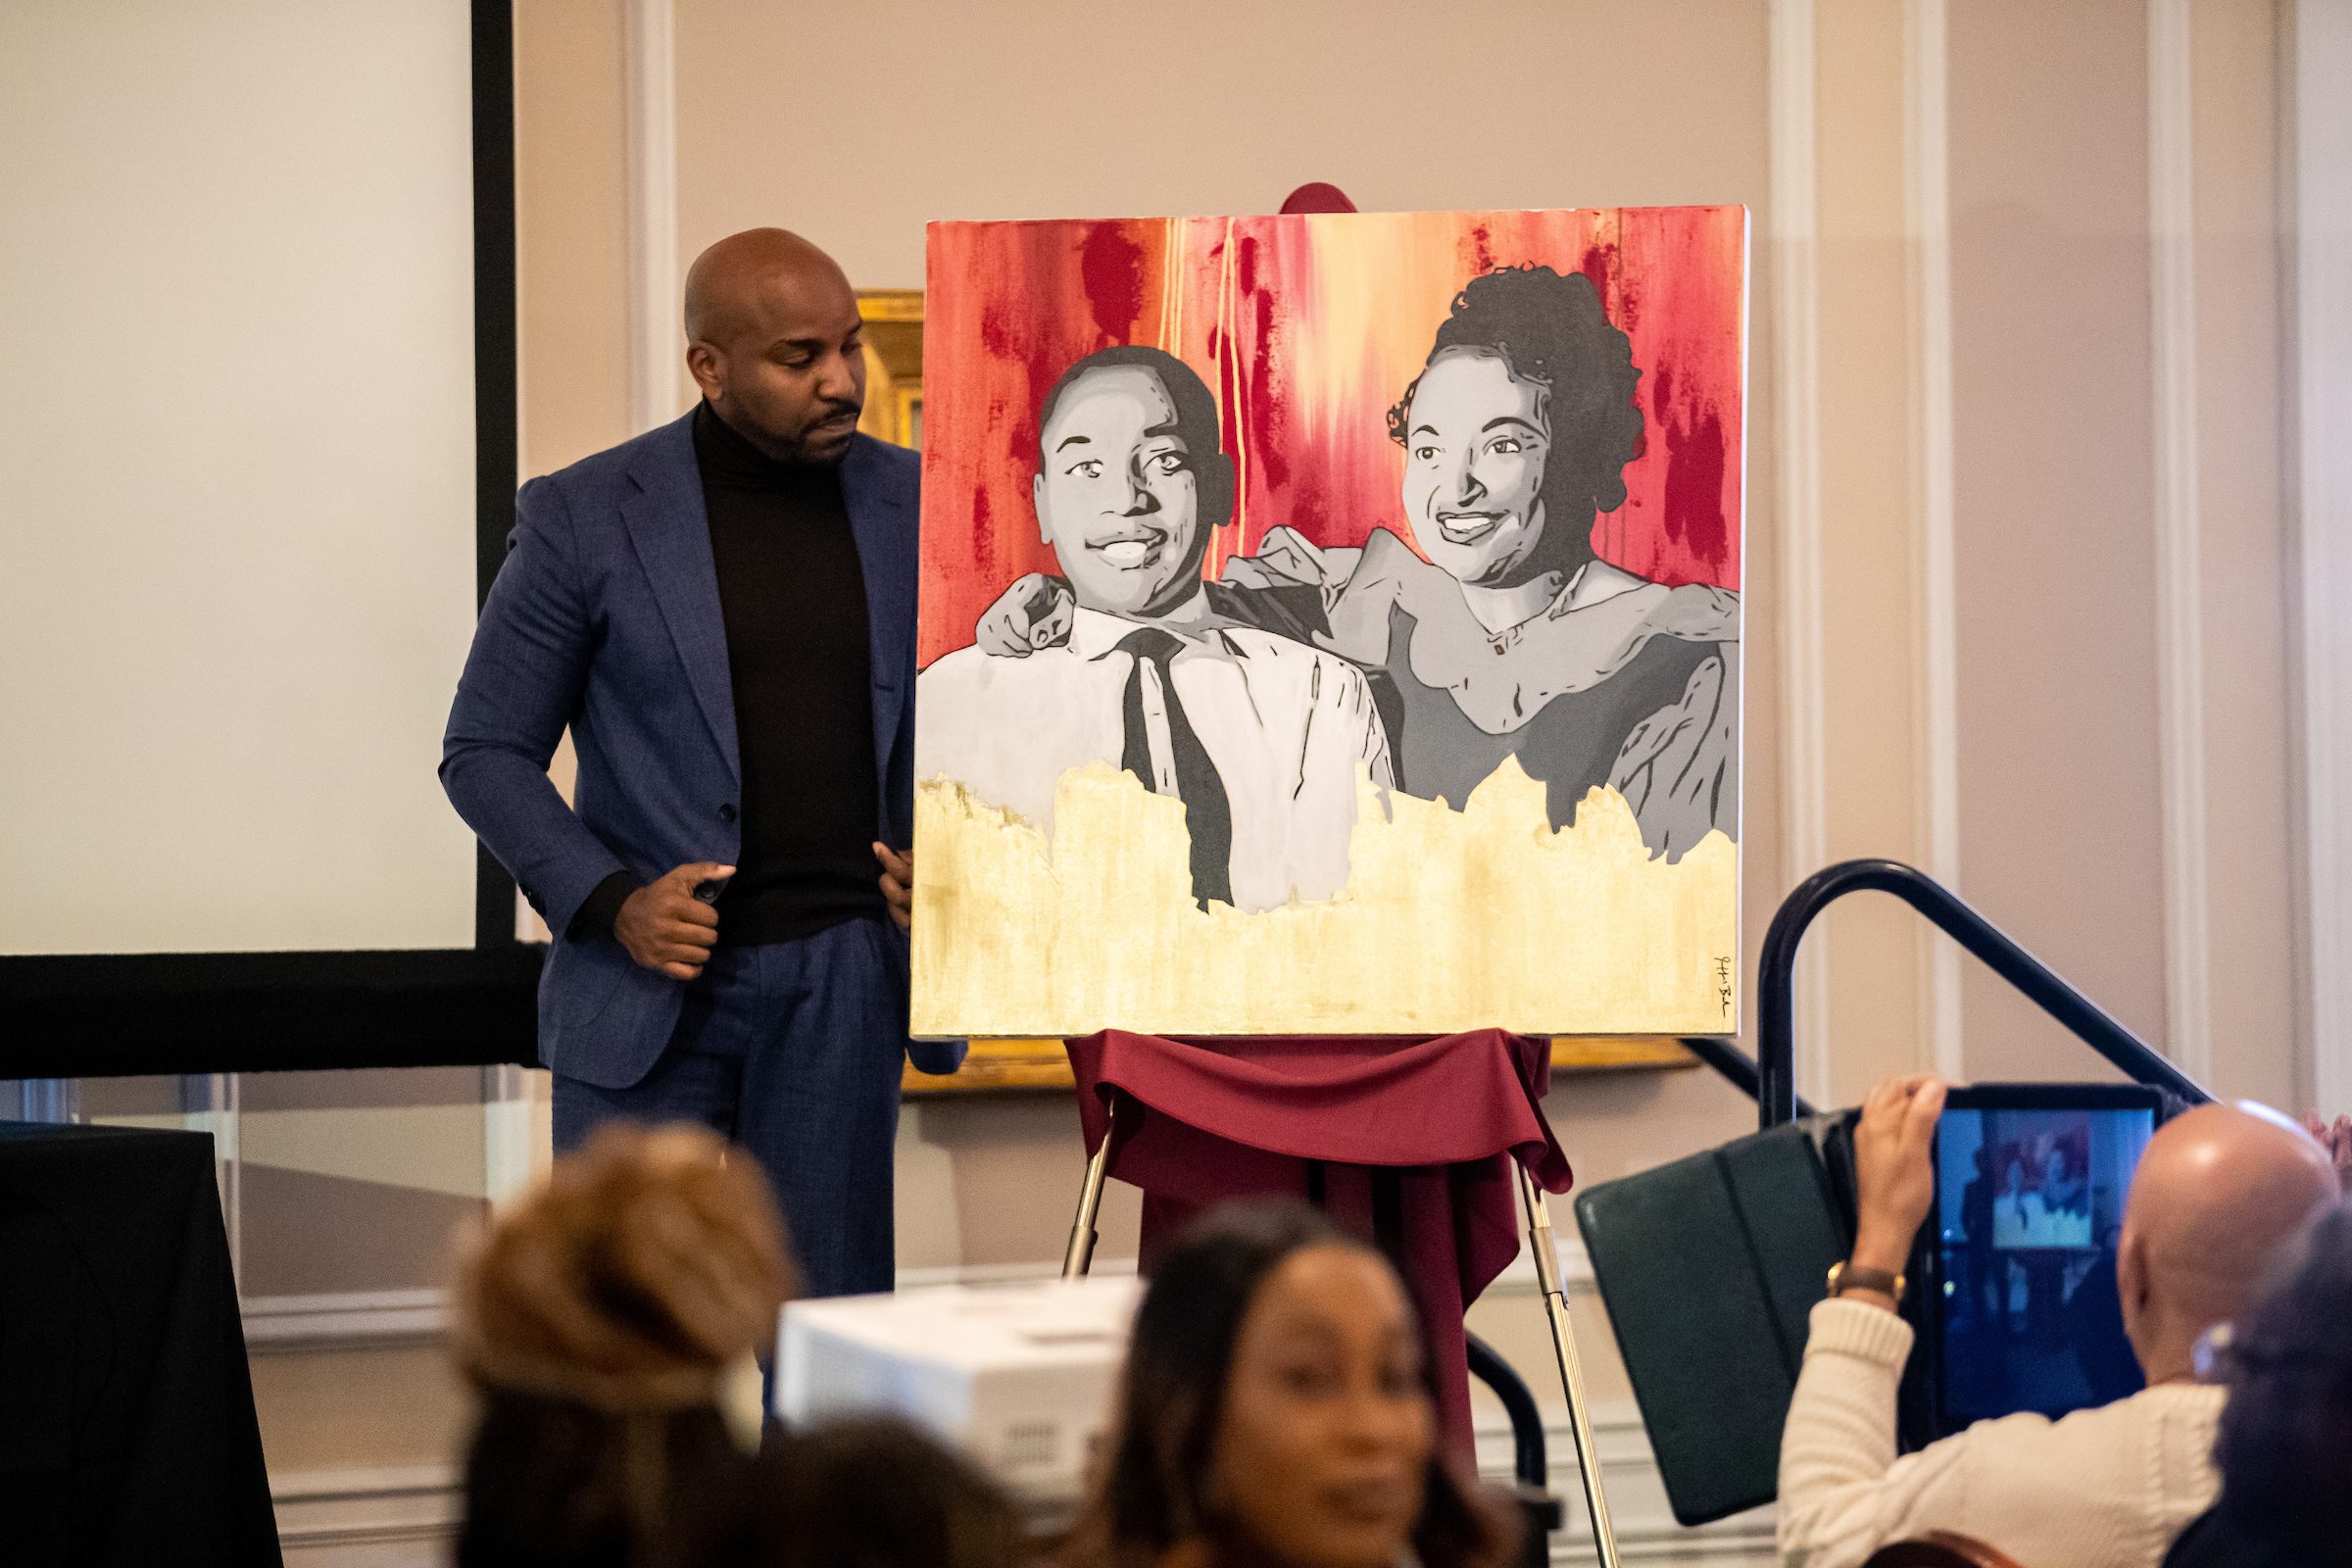 Loyola University Chicago announces a scholarship in honor of Loyola alumnae Mamie Till-Mobley at the Union League in Chicago on October 21, 2022. (Photo: Lukas Keapproth)